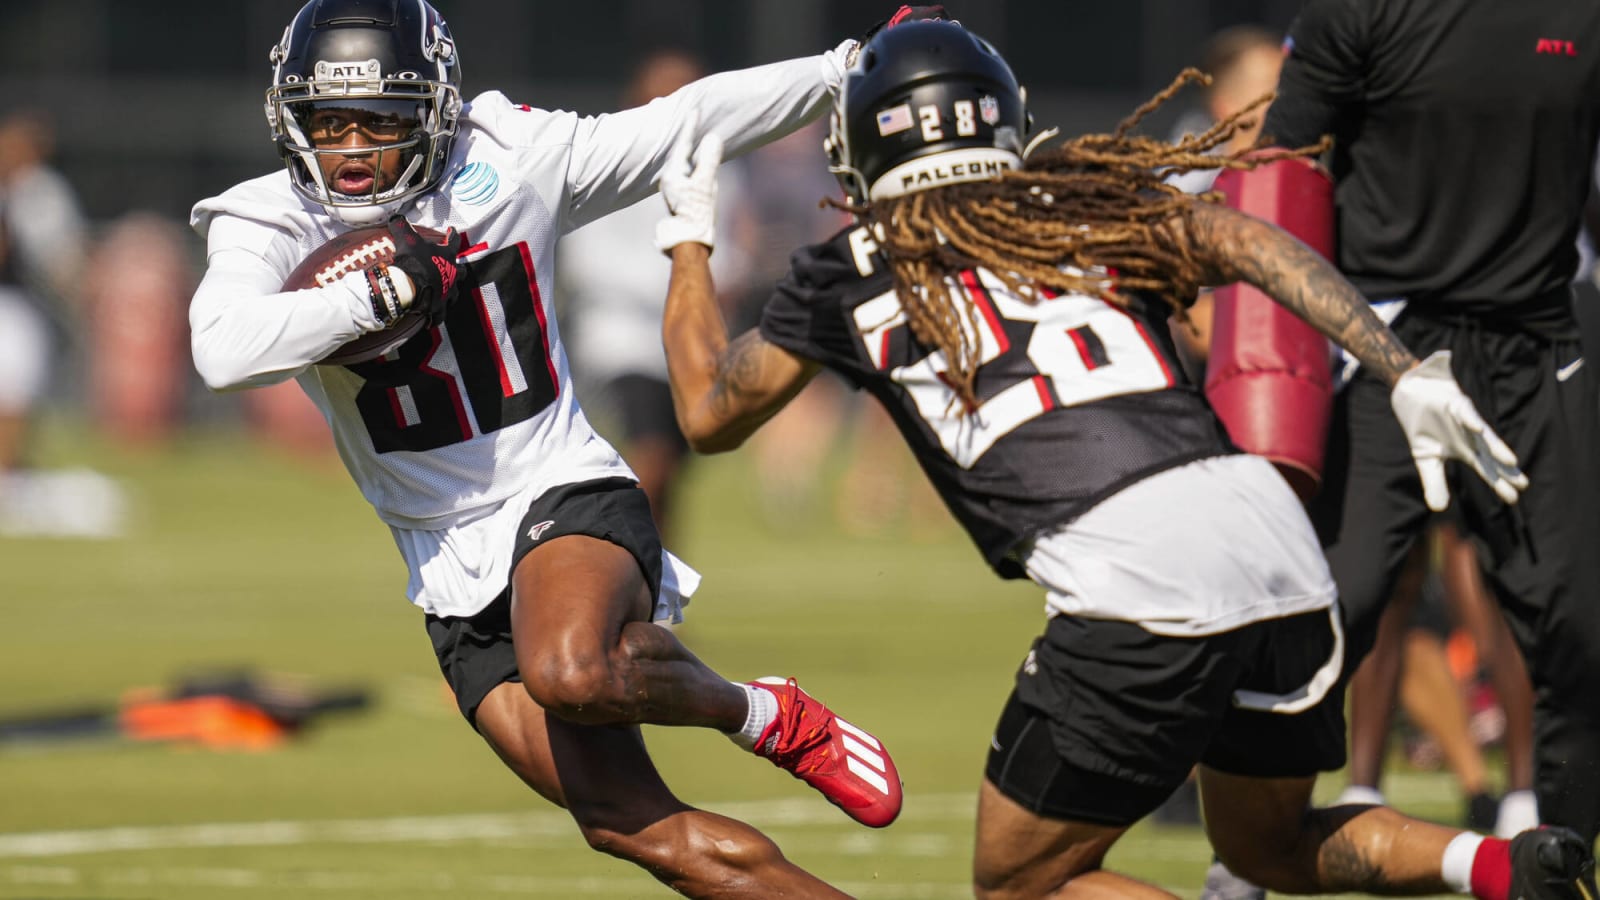 Falcons cut veteran WR, paving way for Jared Bernhardt to make roster